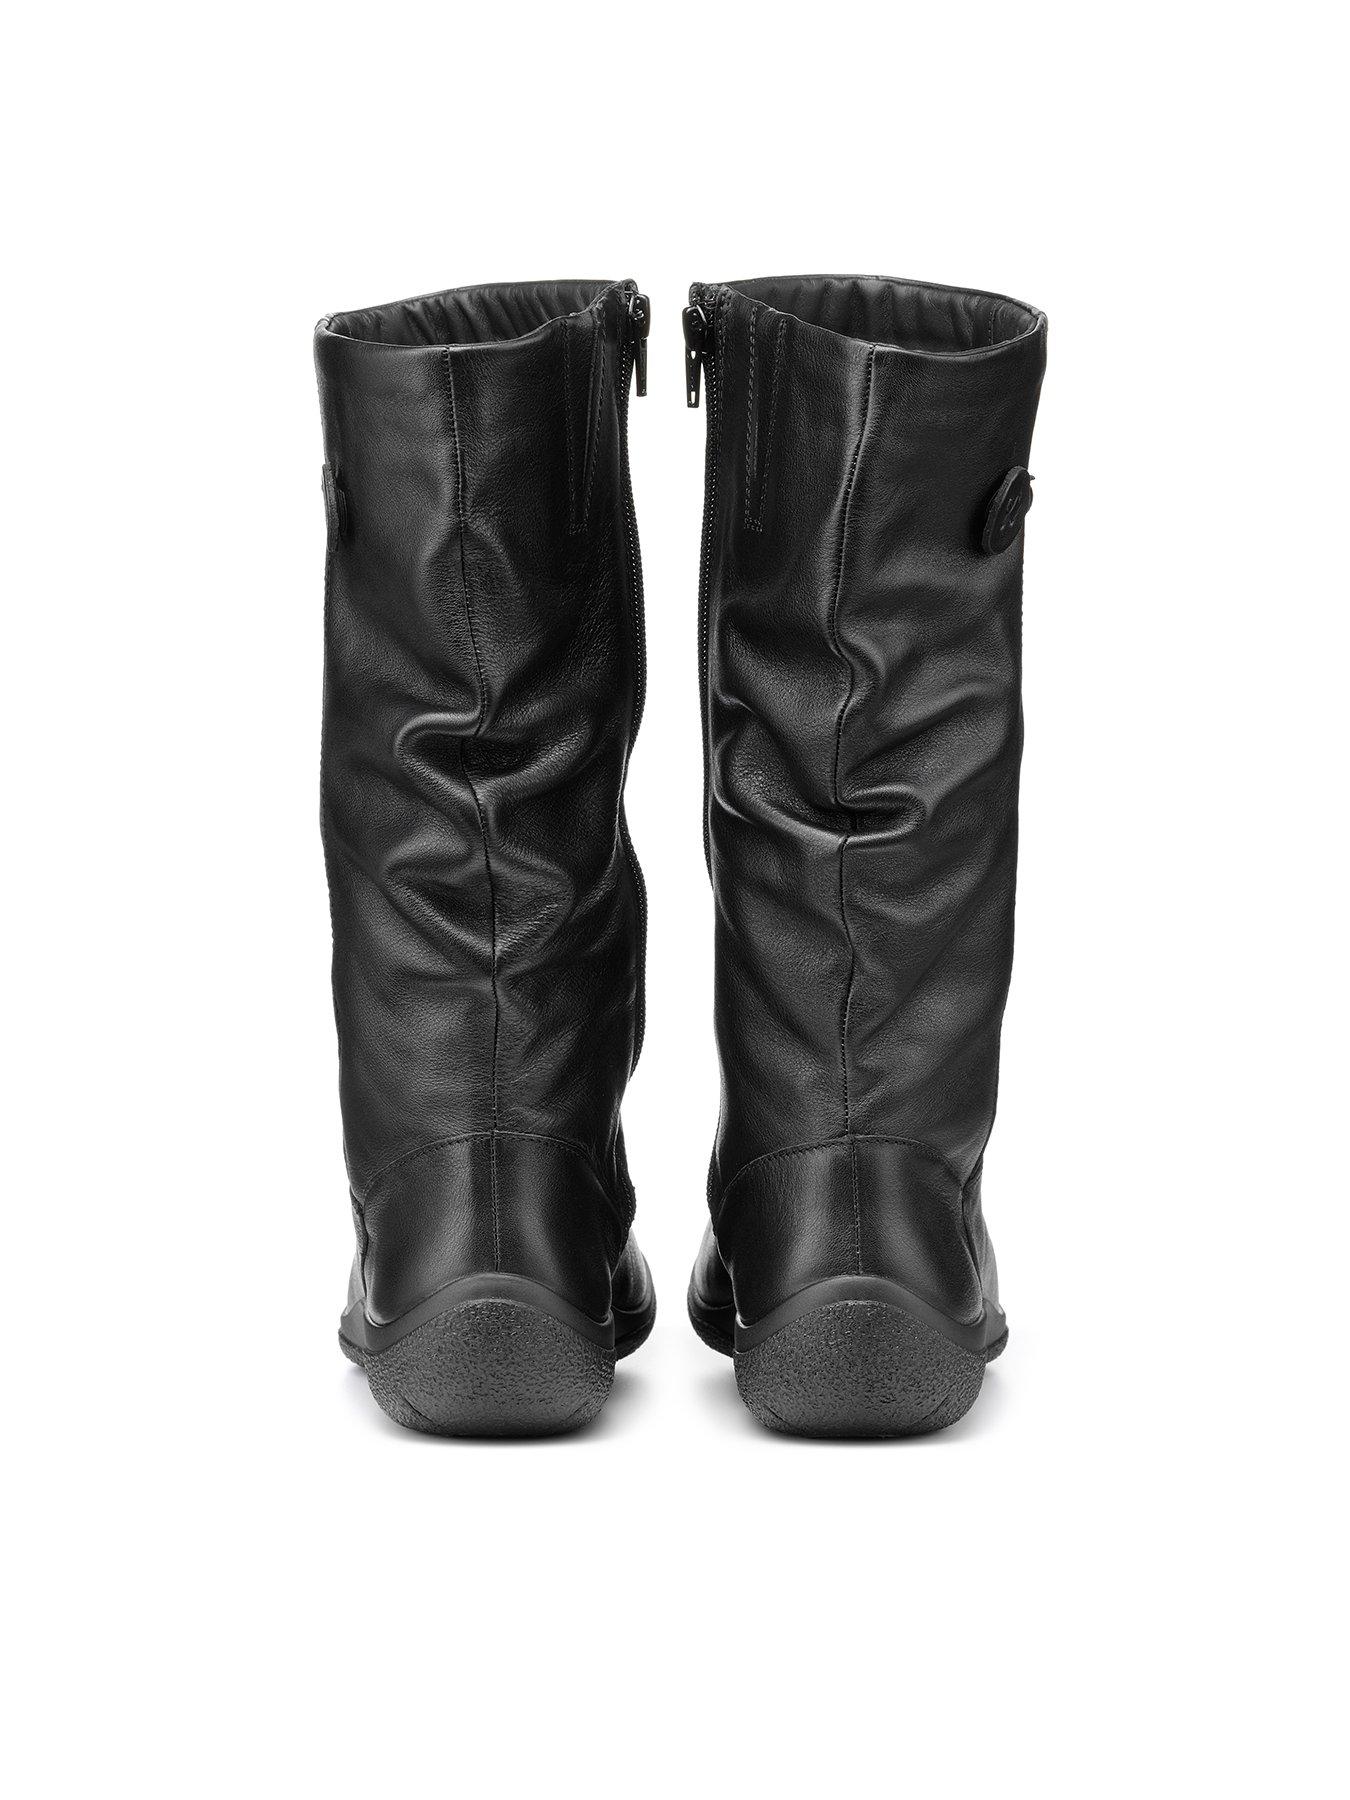 Hotter Derrymore II Extra Wide Knee High Boots - Black | very.co.uk